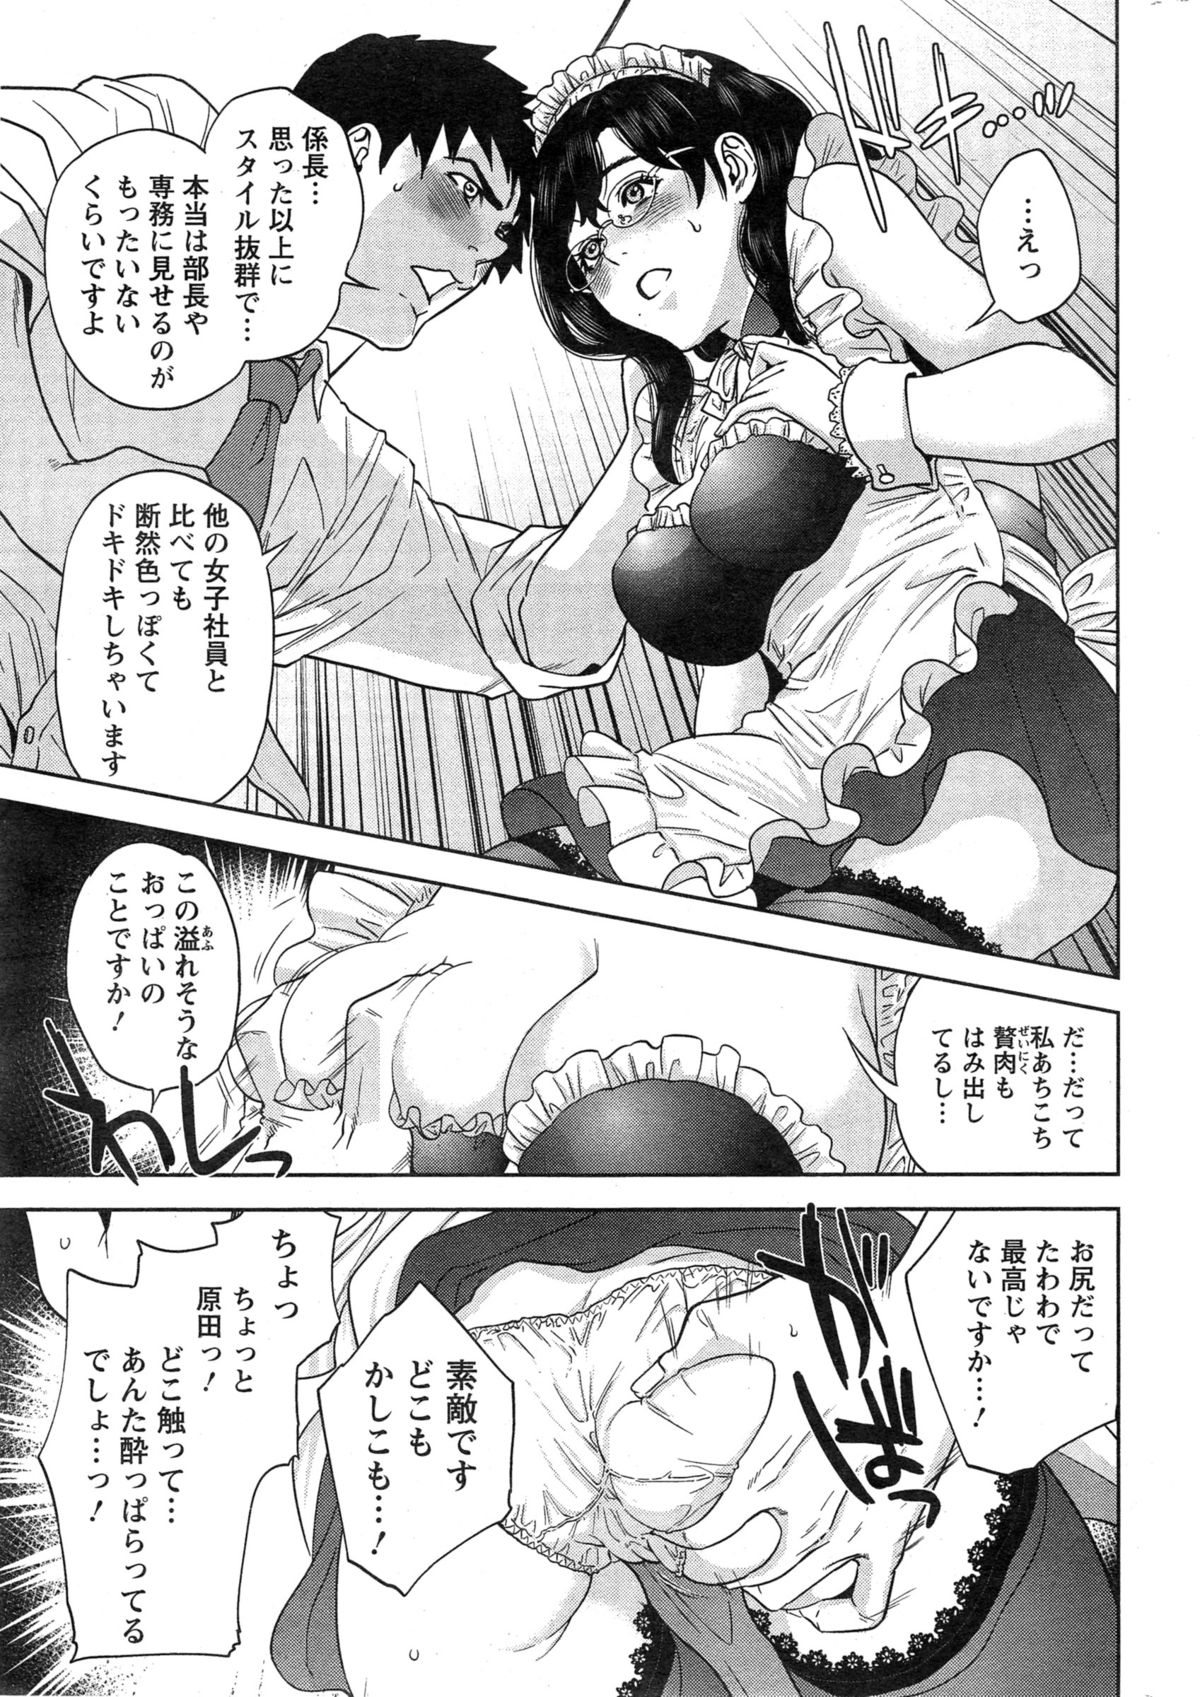 Action Pizazz Cgumi 2015-02 page 17 full